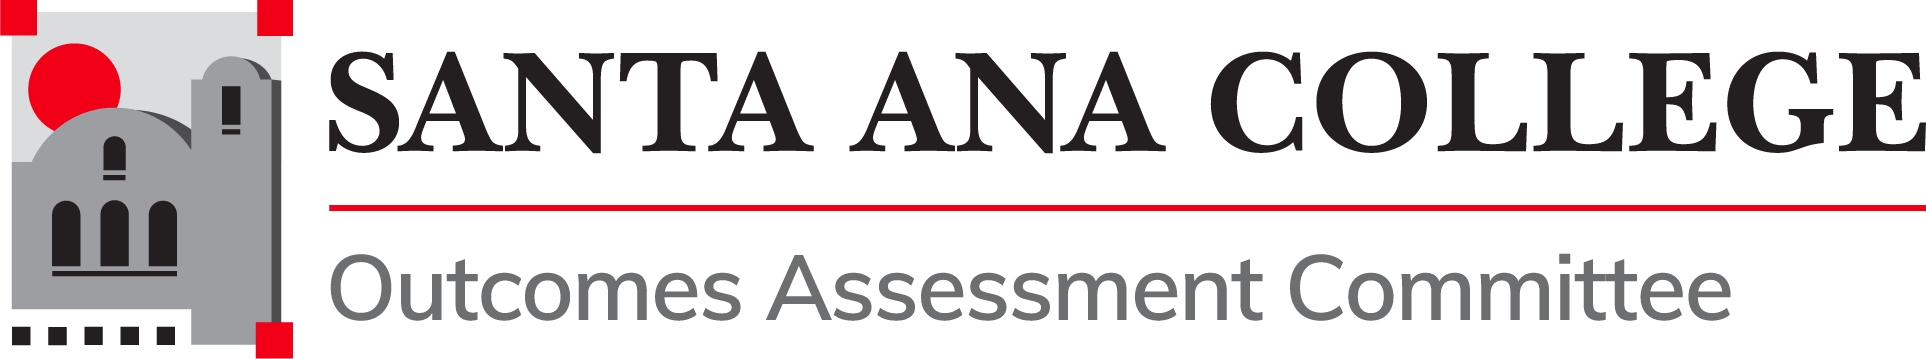 Santa Ana College Outcomes Assessment Committee logo